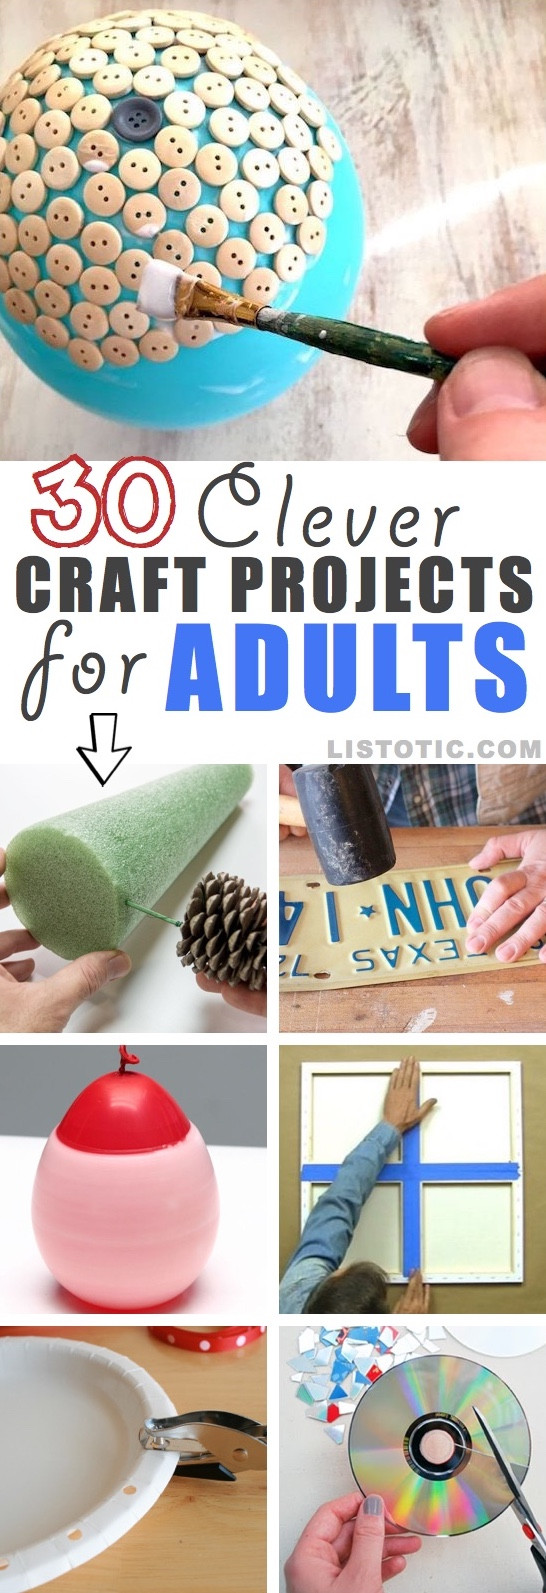 Fun Ideas For Adults
 10 Creative Craft Ideas For Adults Amately